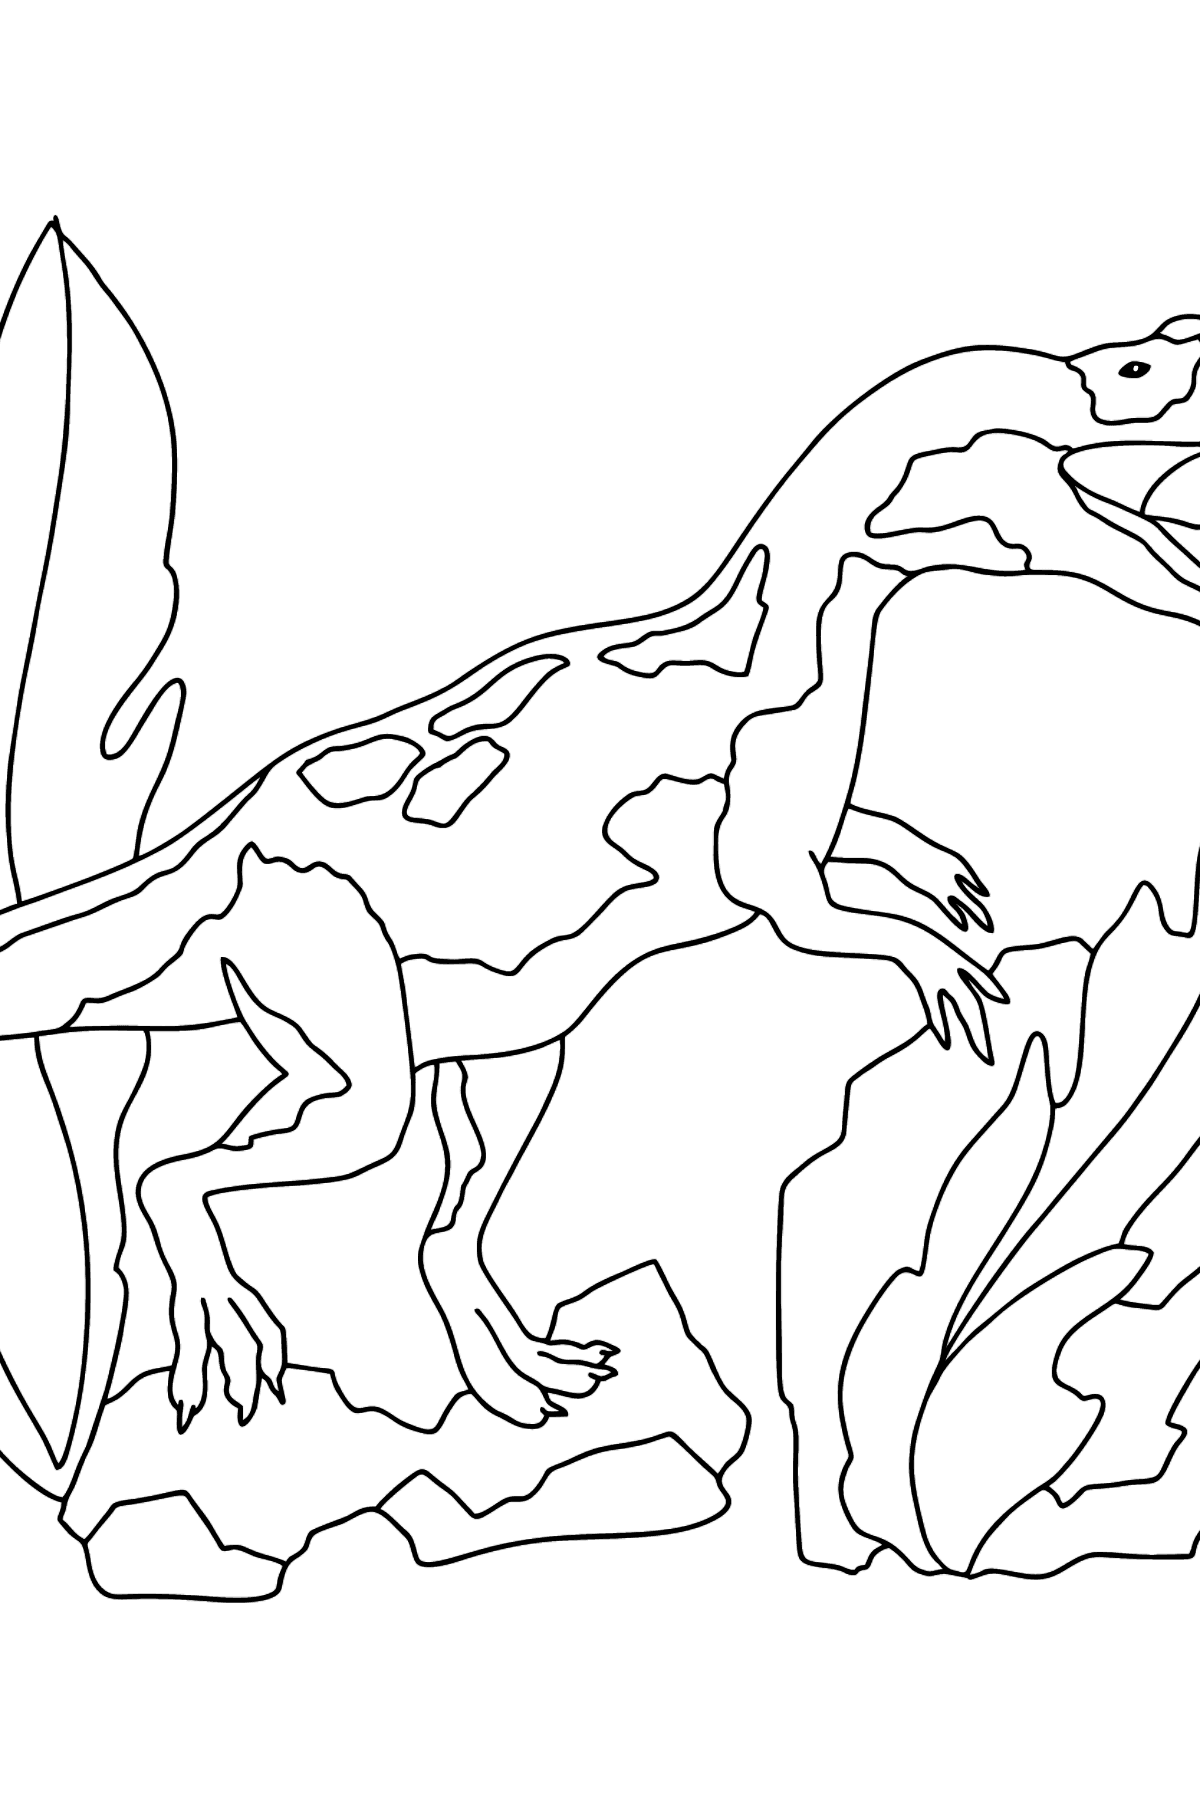 Jurassic Dinosaur Coloring Page (difficult) - Coloring Pages for Kids